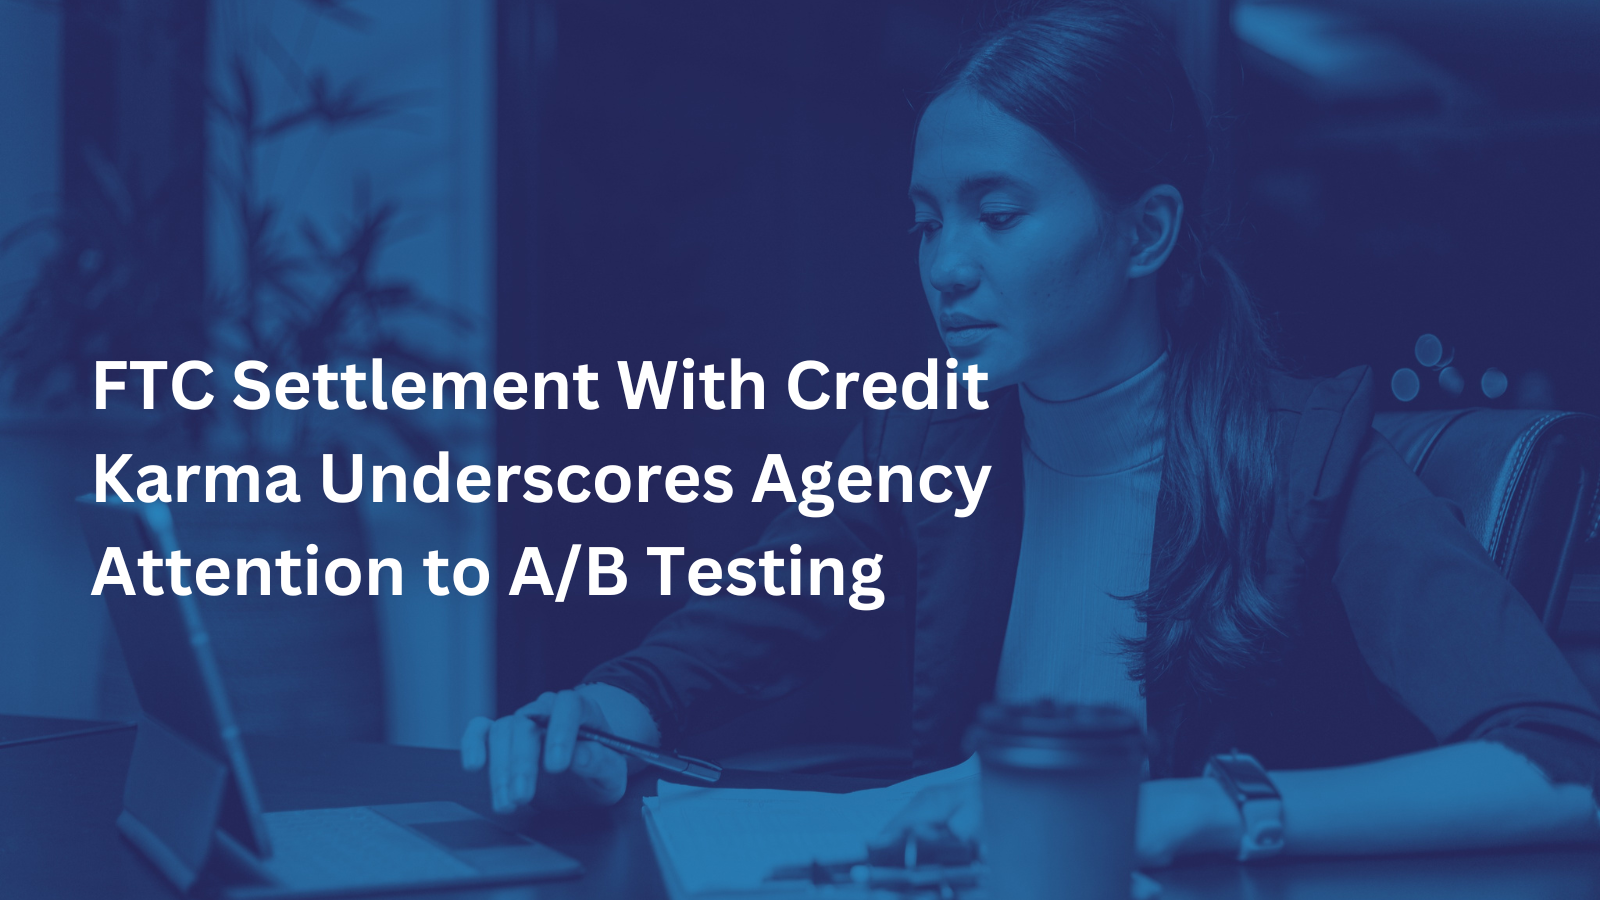 FTC Settlement With Credit Karma Underscores Agency Attention to A/B Testing